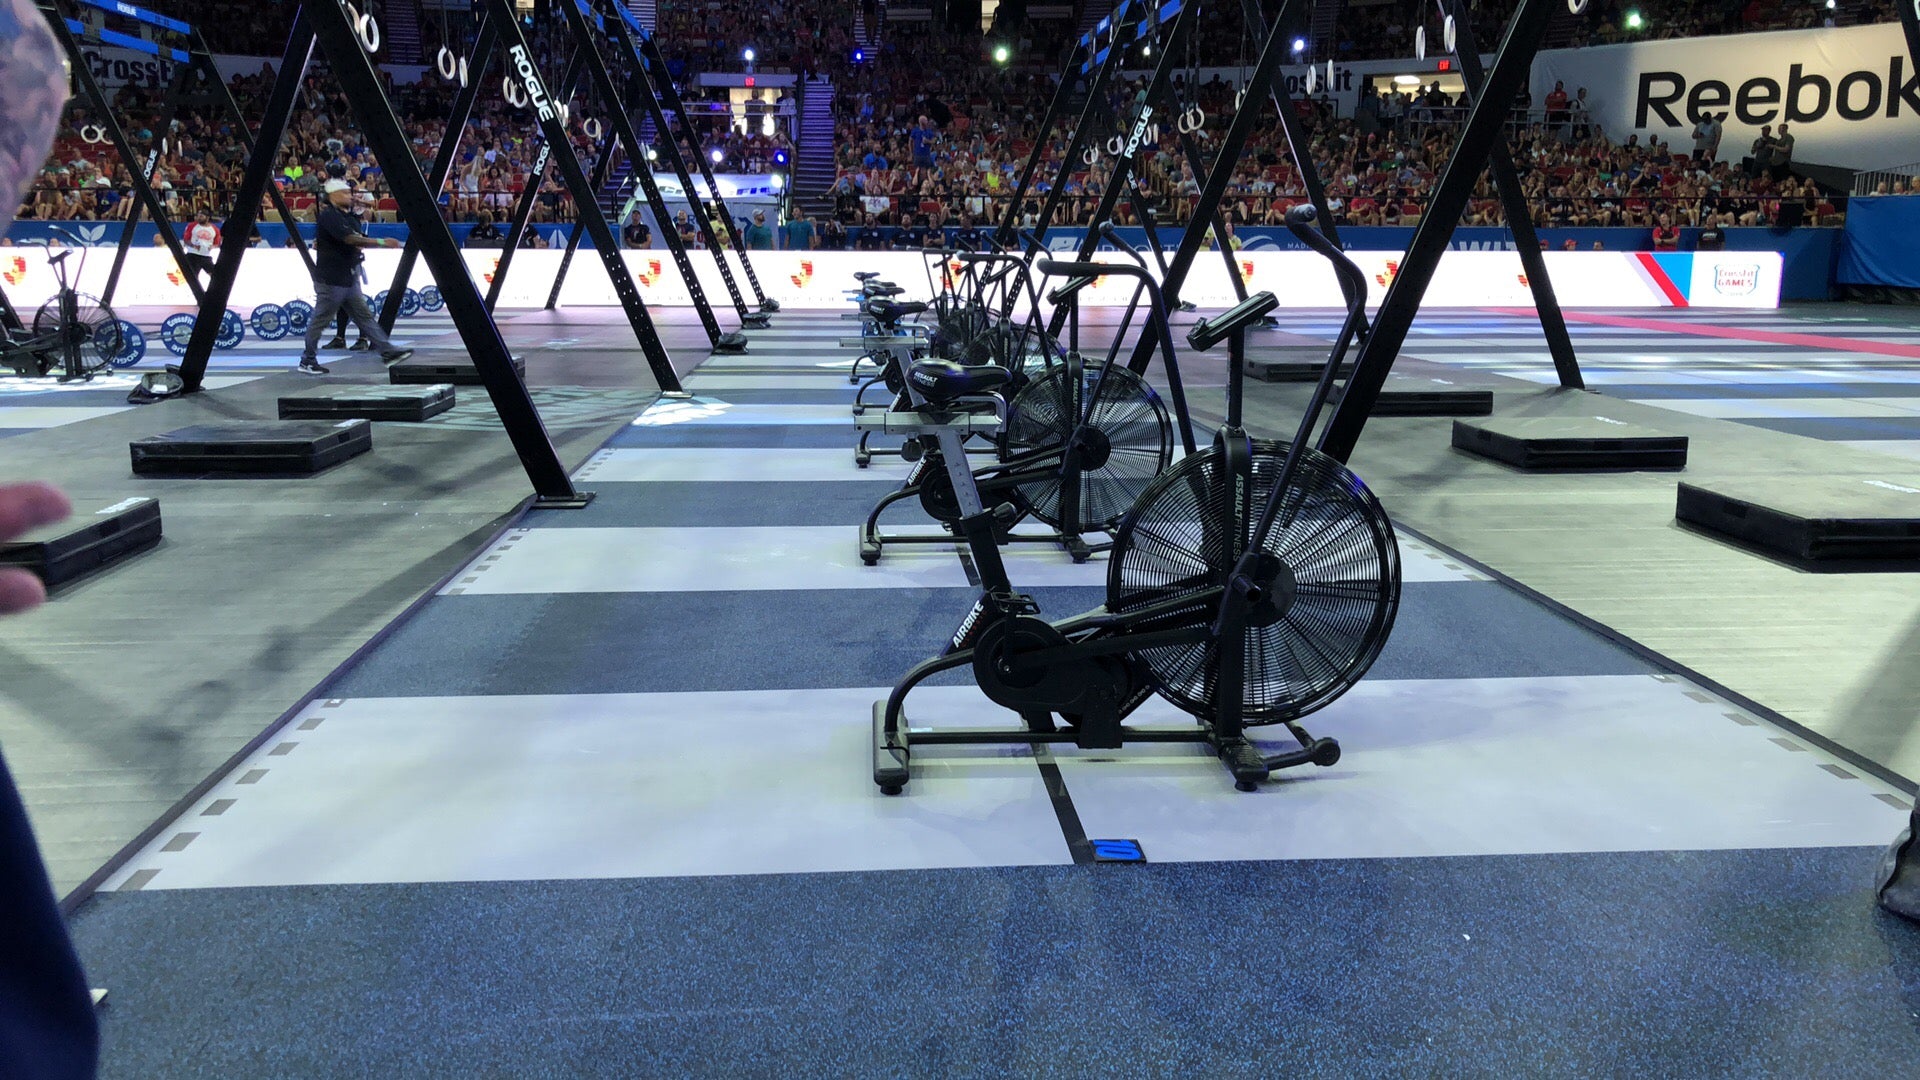 A long row of assaultbikes among other fitness equipment in an arena competitive setting